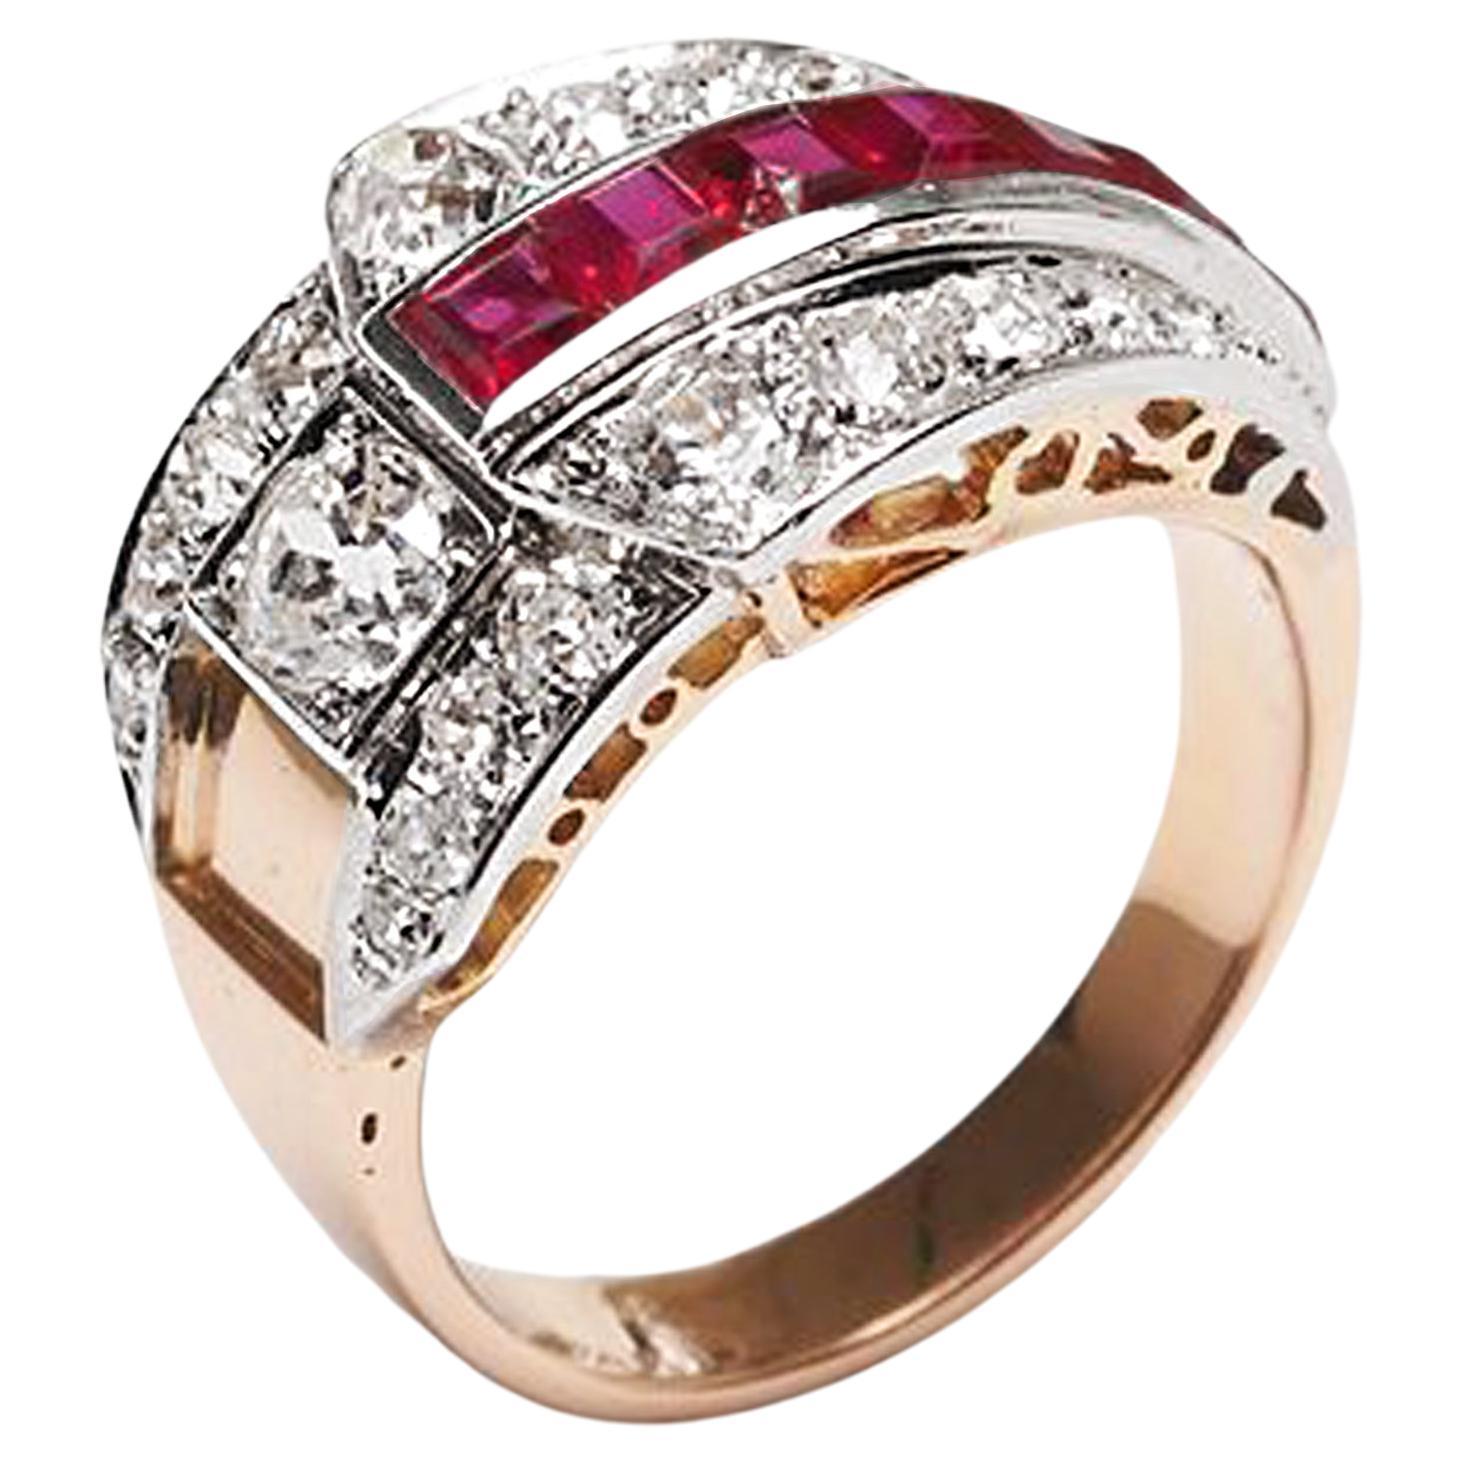 A.F. Souteyrand French Art Deco Ruby Diamond Platinum and Gold Ring, Circa 1935 For Sale